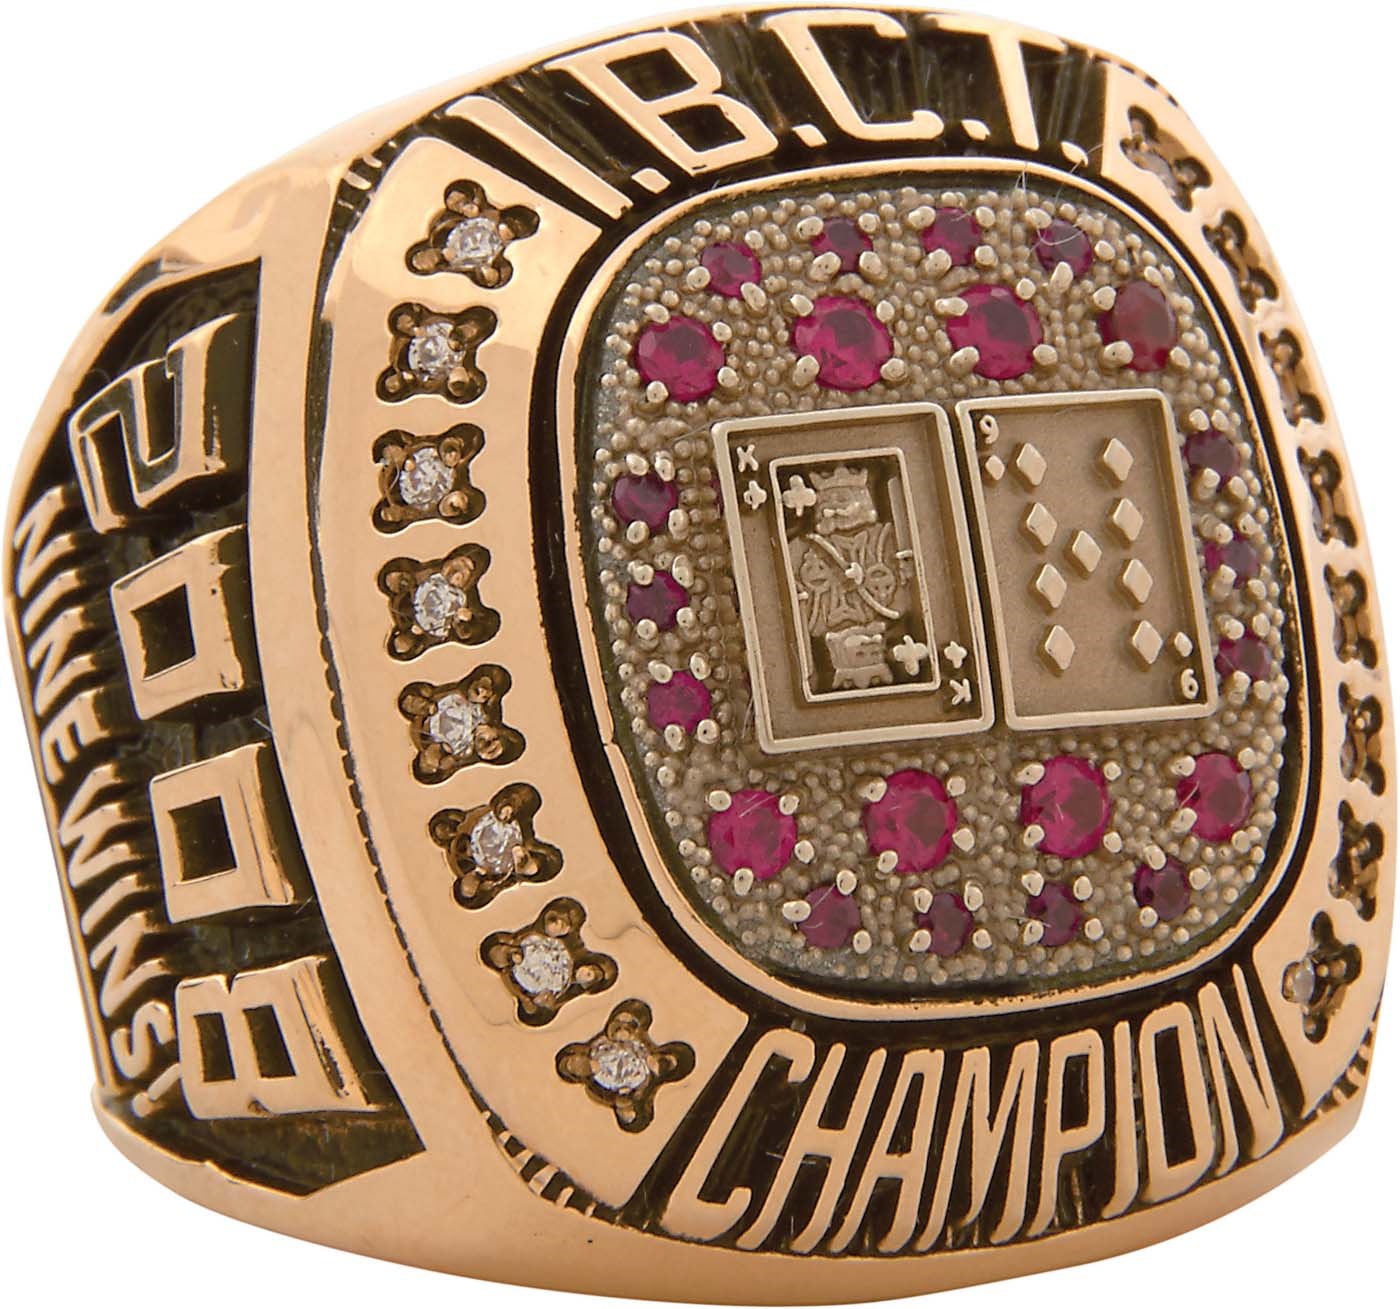 2008 Baccarat Championship Ring - Sourced from Tournament Owner